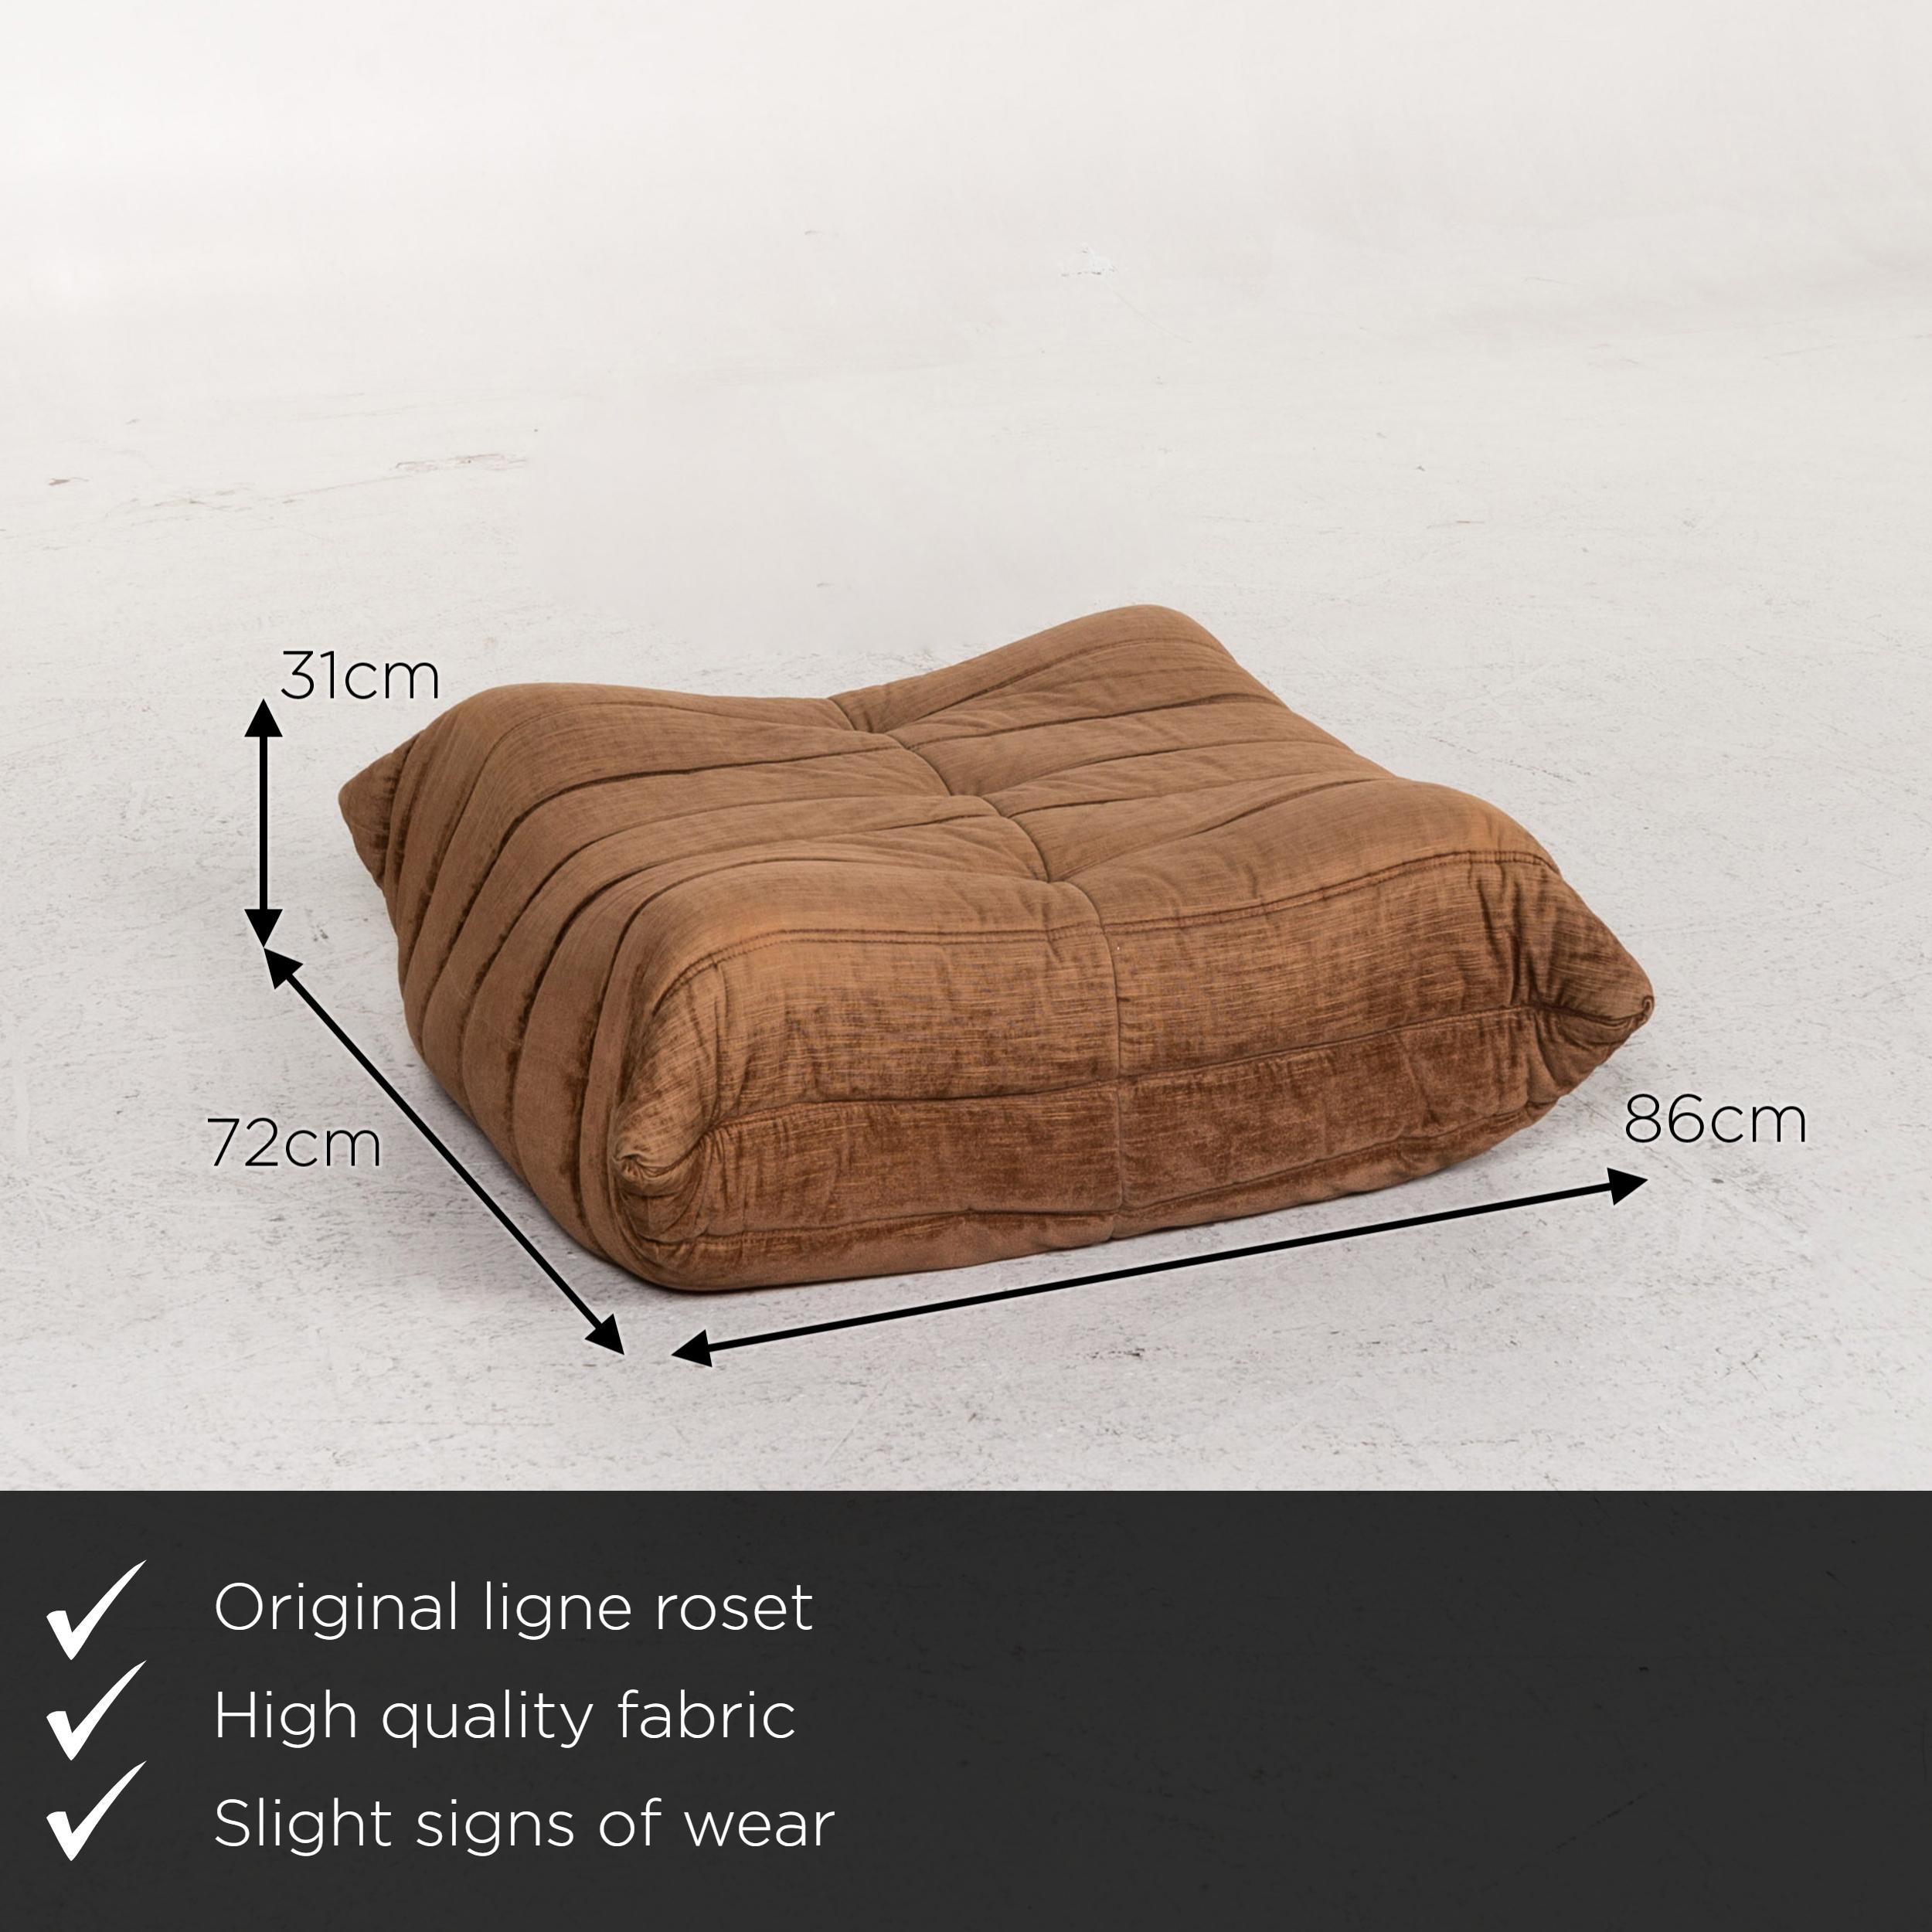 We present to you a Ligne Roset Togo stool brown ottoman.

 

Product measurements in centimeters:
 

Depth 72
Width 86
Height 31.




 